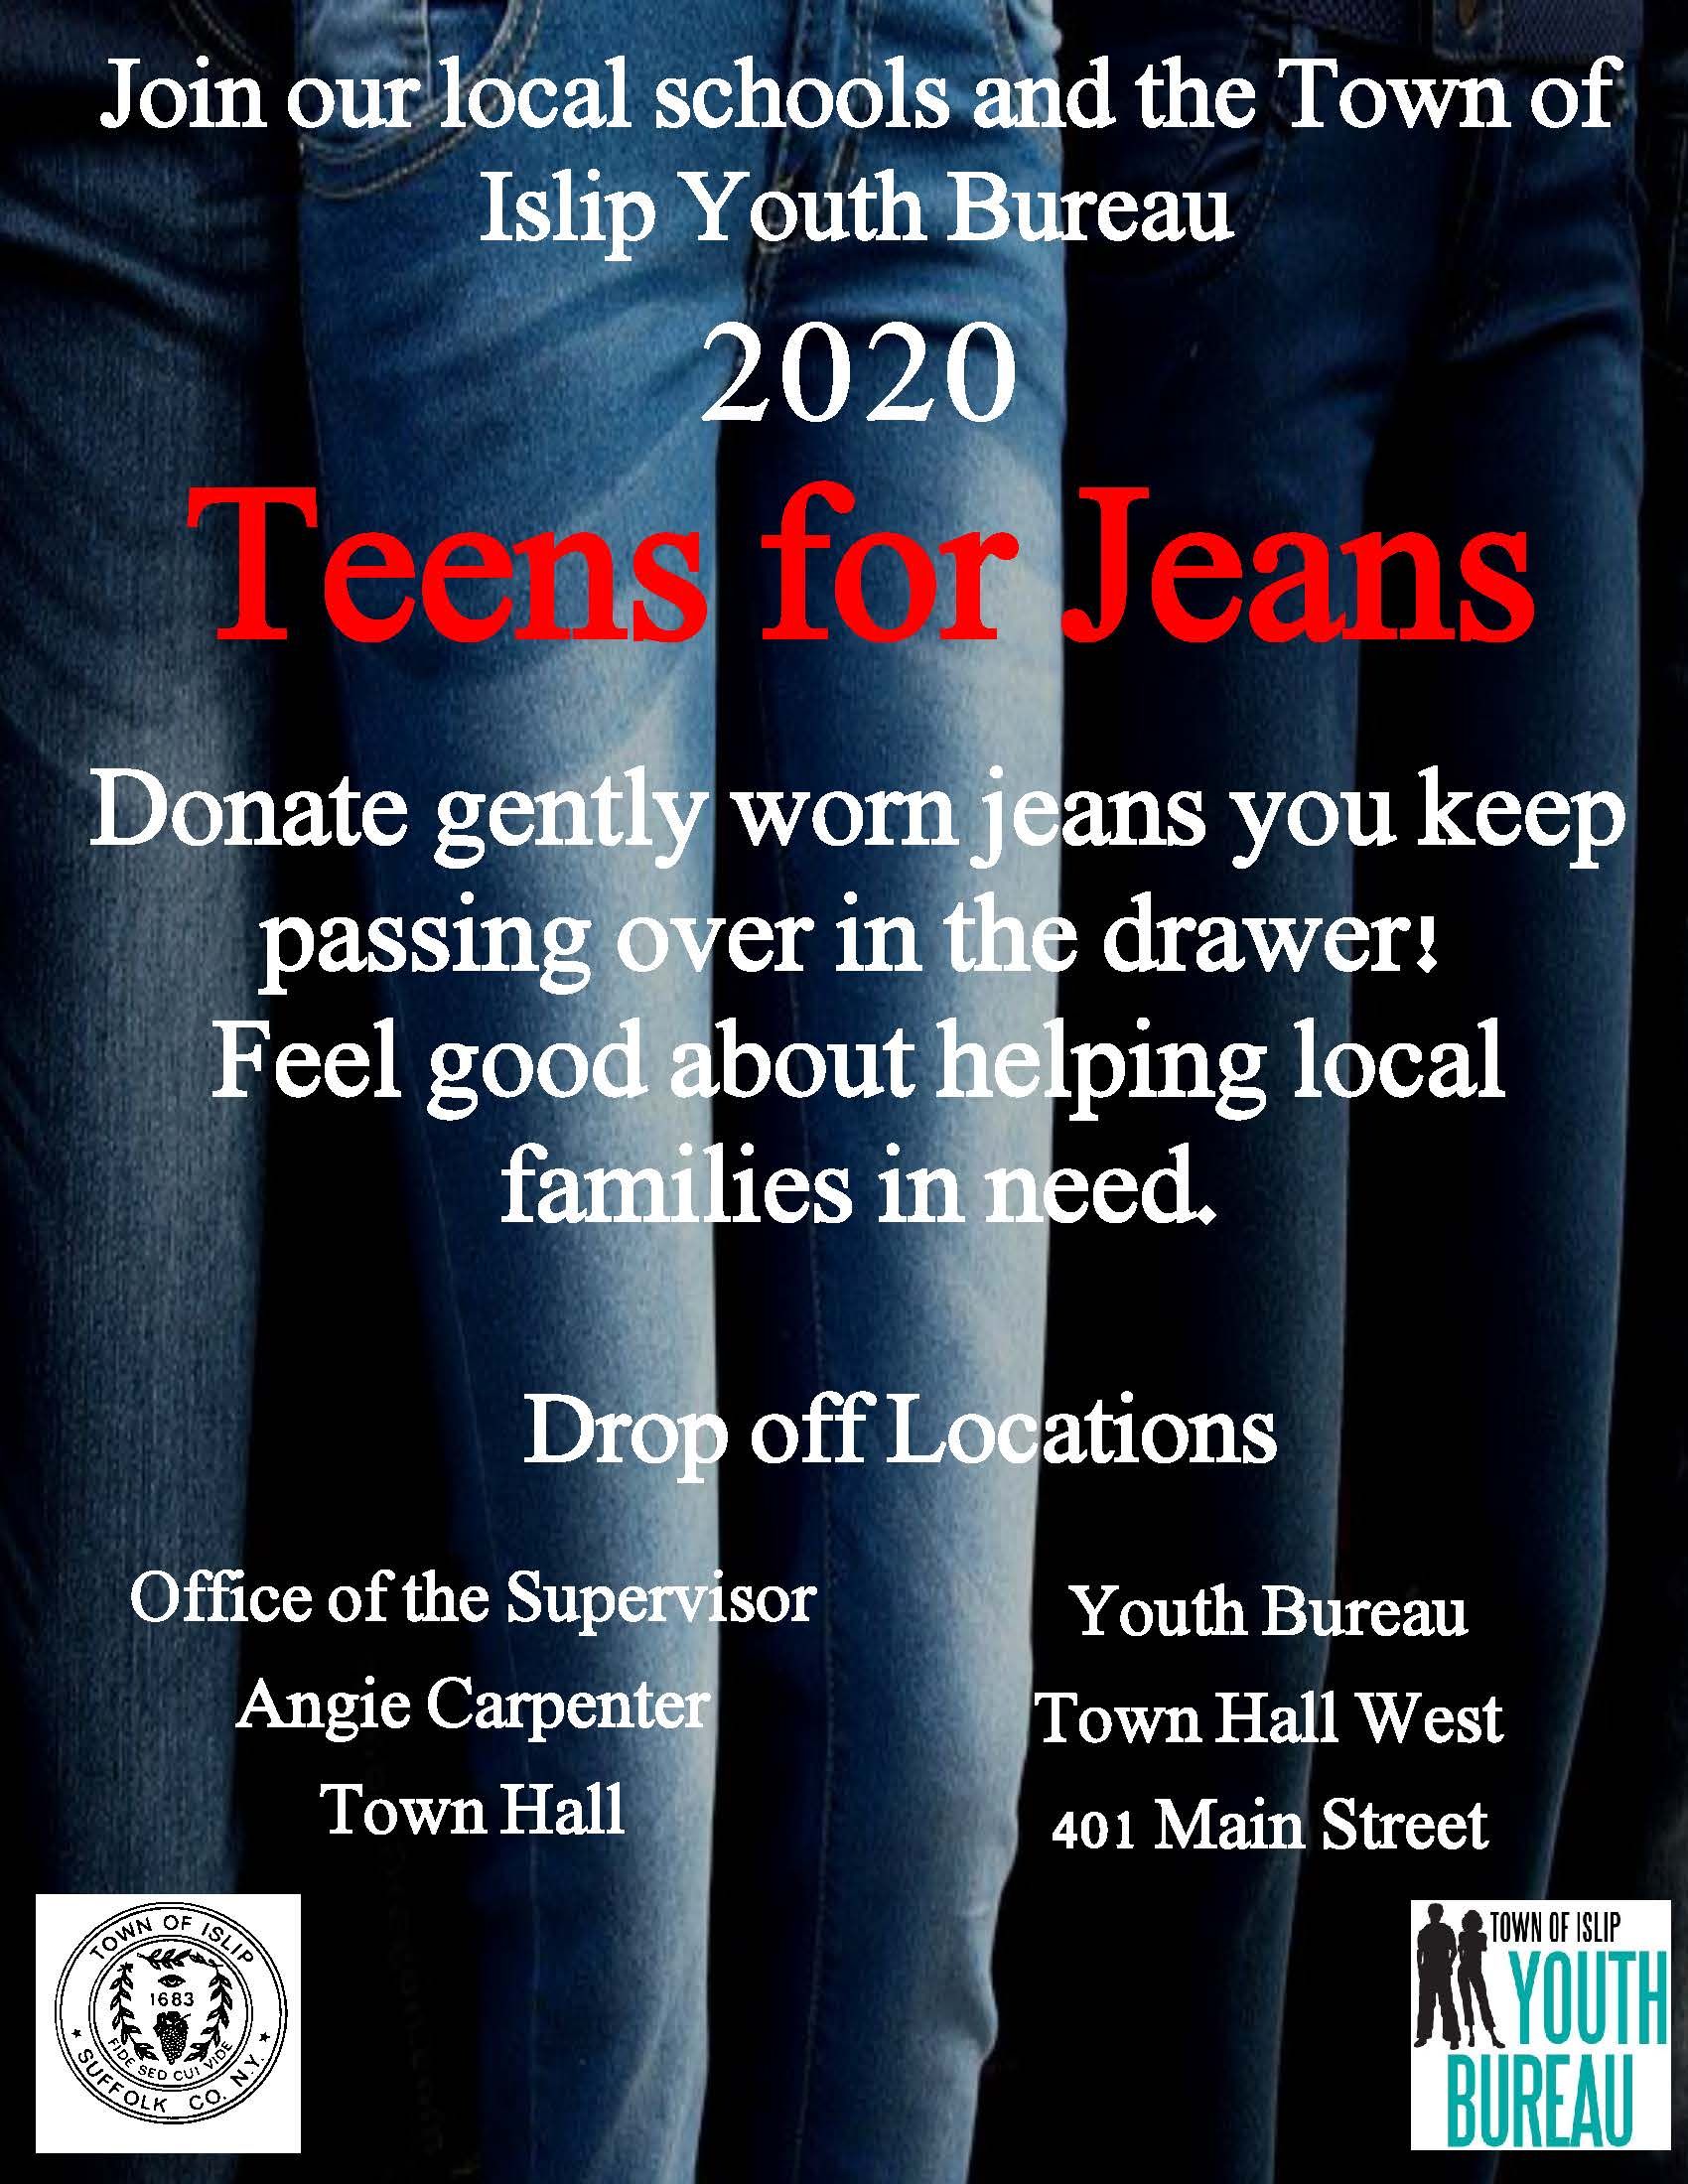 The announcement flyer for Youth Bureau's 2020 Teens for Jeans campaign. Call 631-224-5320 for more info.